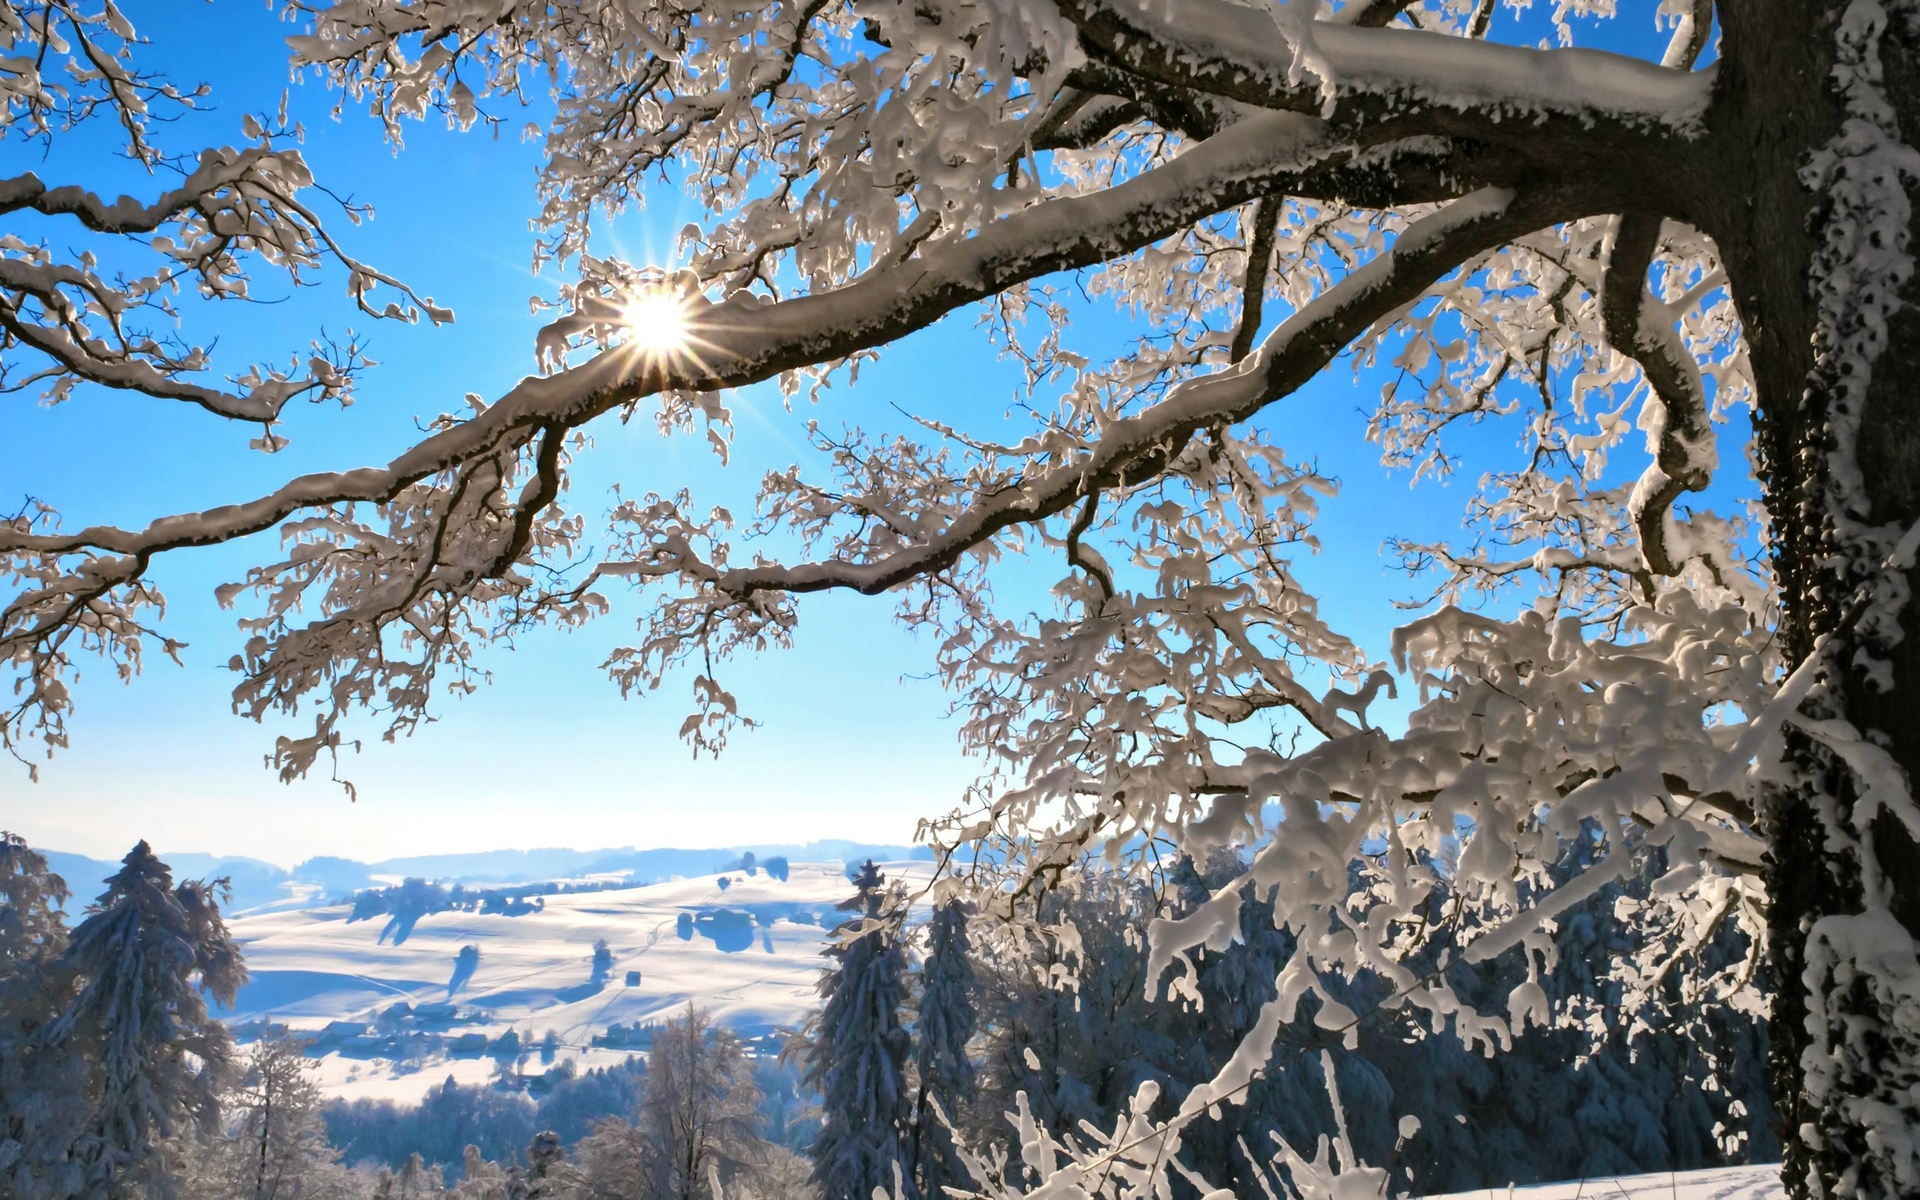 nature, Landscapes, Trees, Scenic, View, Winter, Snow, Seasons, Mountains, Hills, Cold, Fields, Sky, Sun, Sunlight, Bark Wallpaper